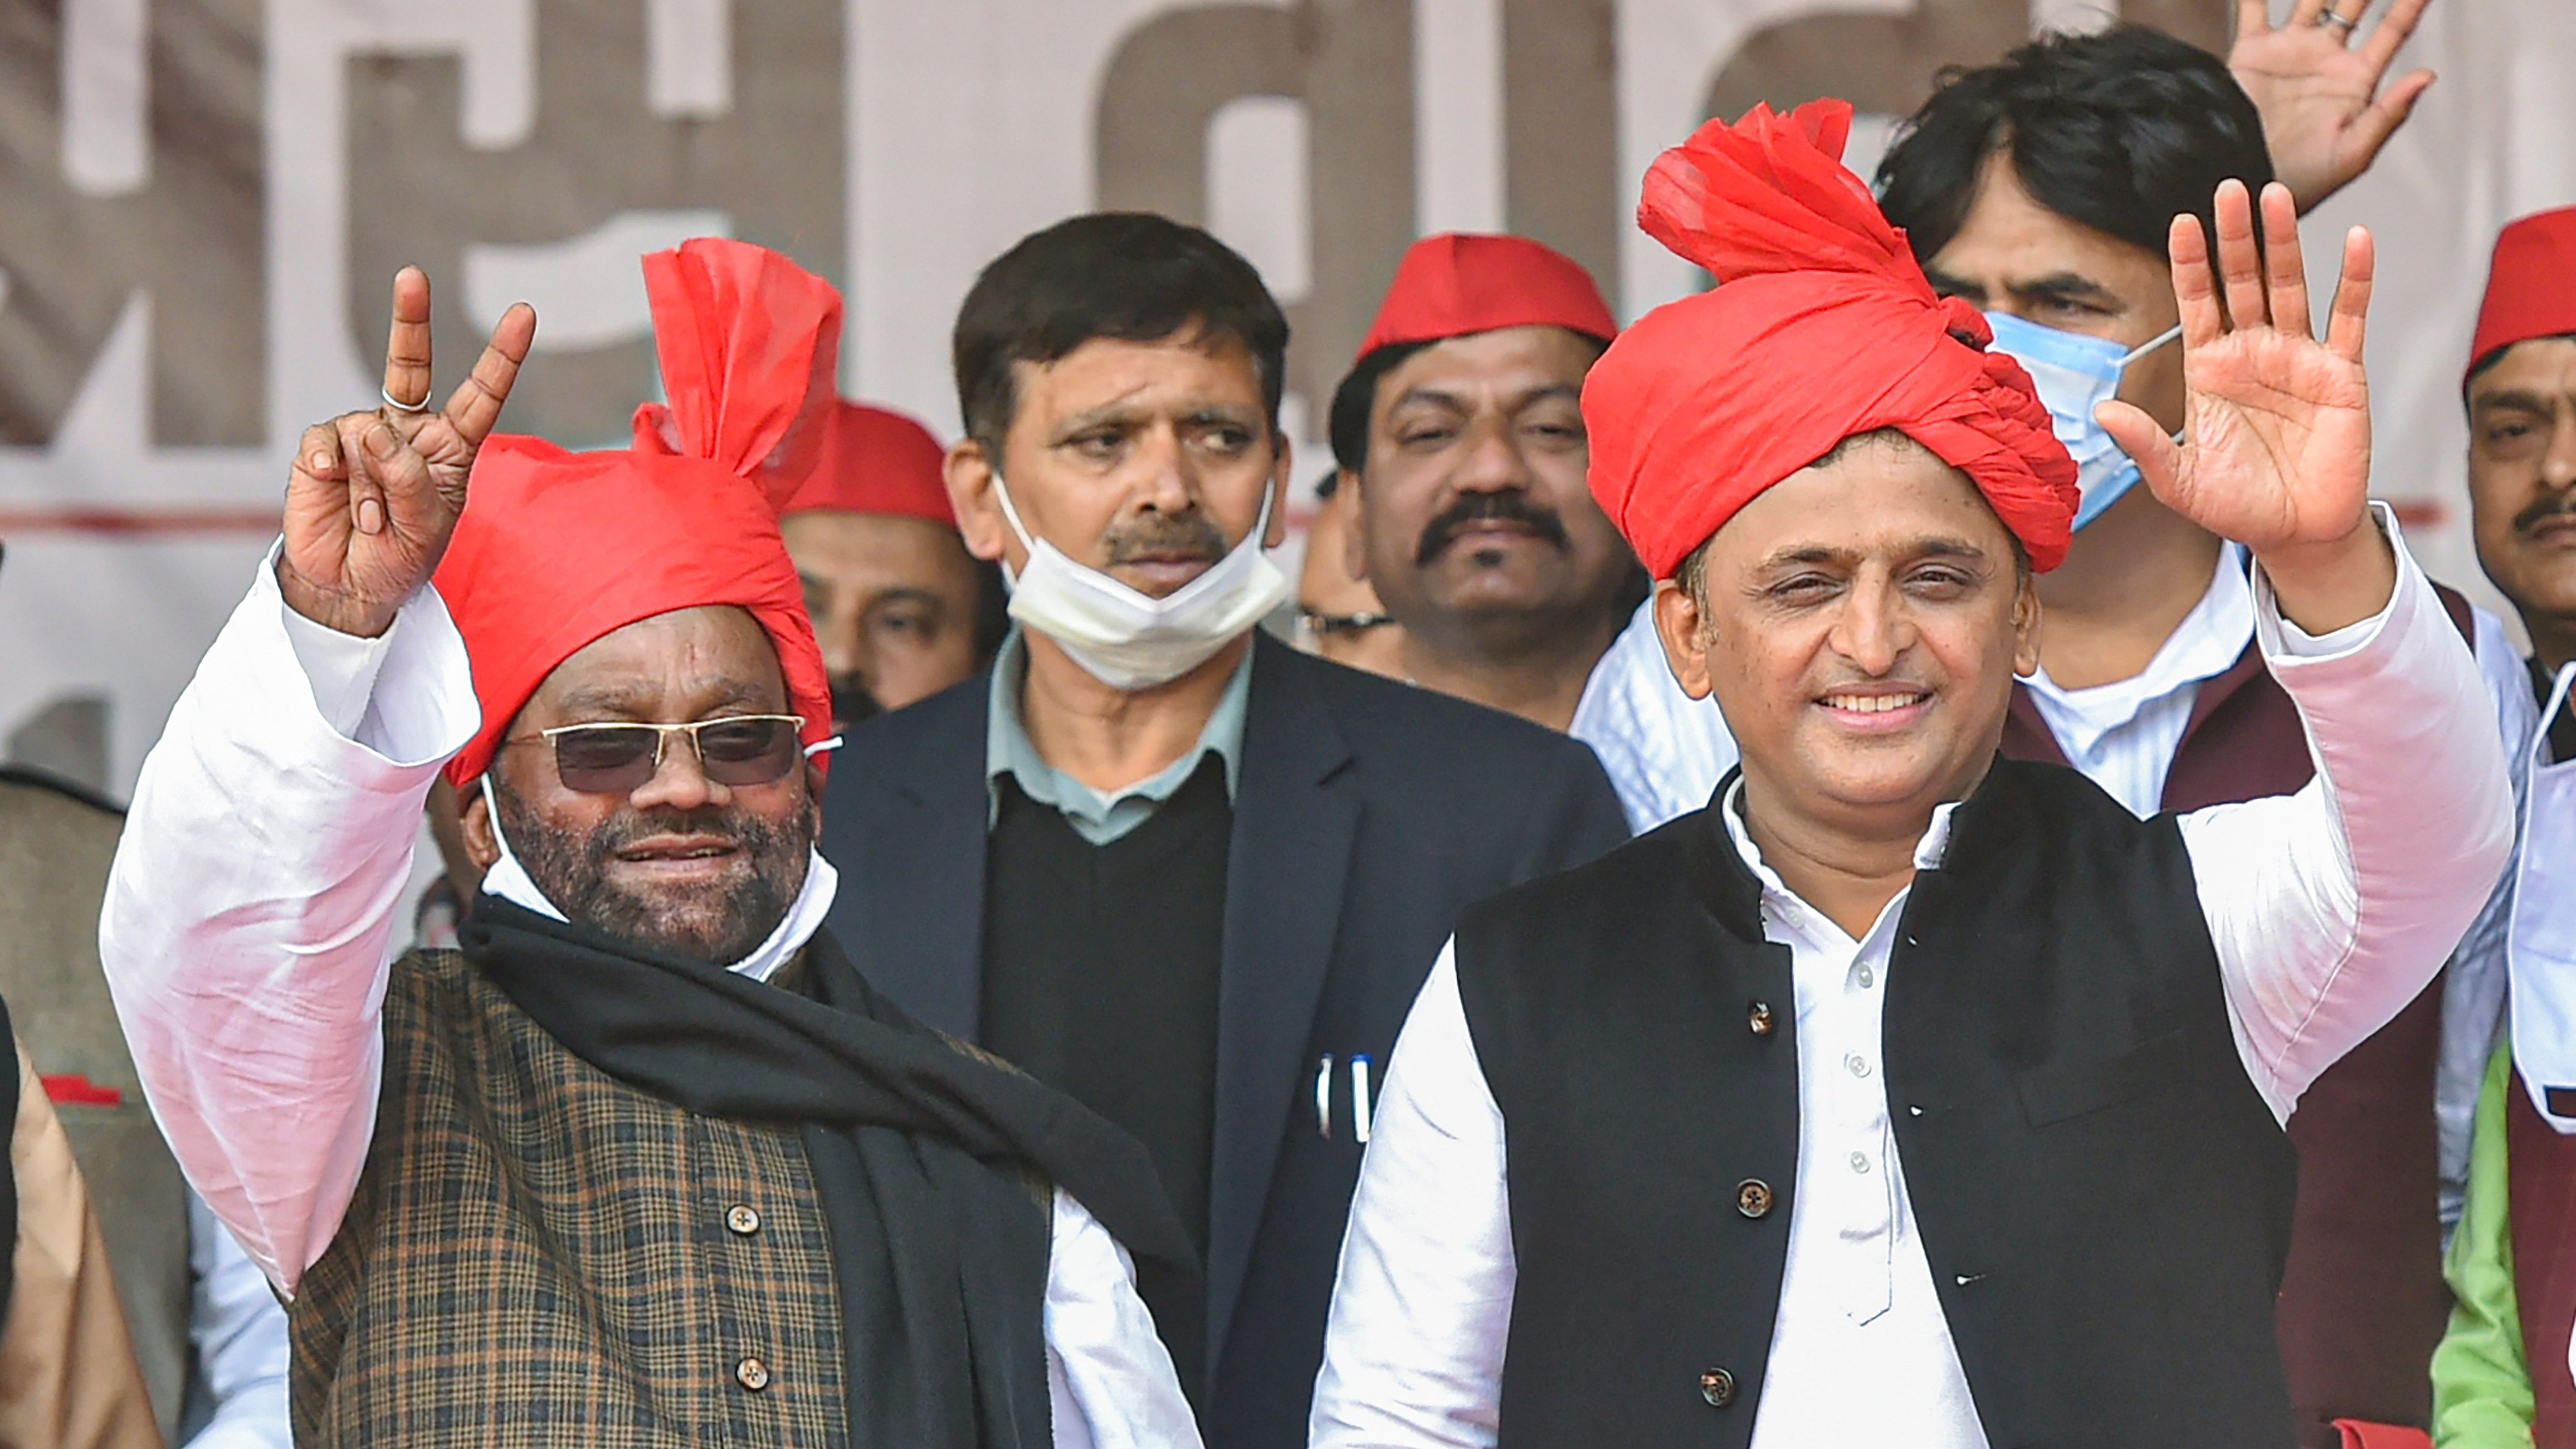 Sections within the Right-wing ecosystem have been putting pressure on SP President Akhilesh Yadav to sack Maurya from the party. Credit: PTI Photo